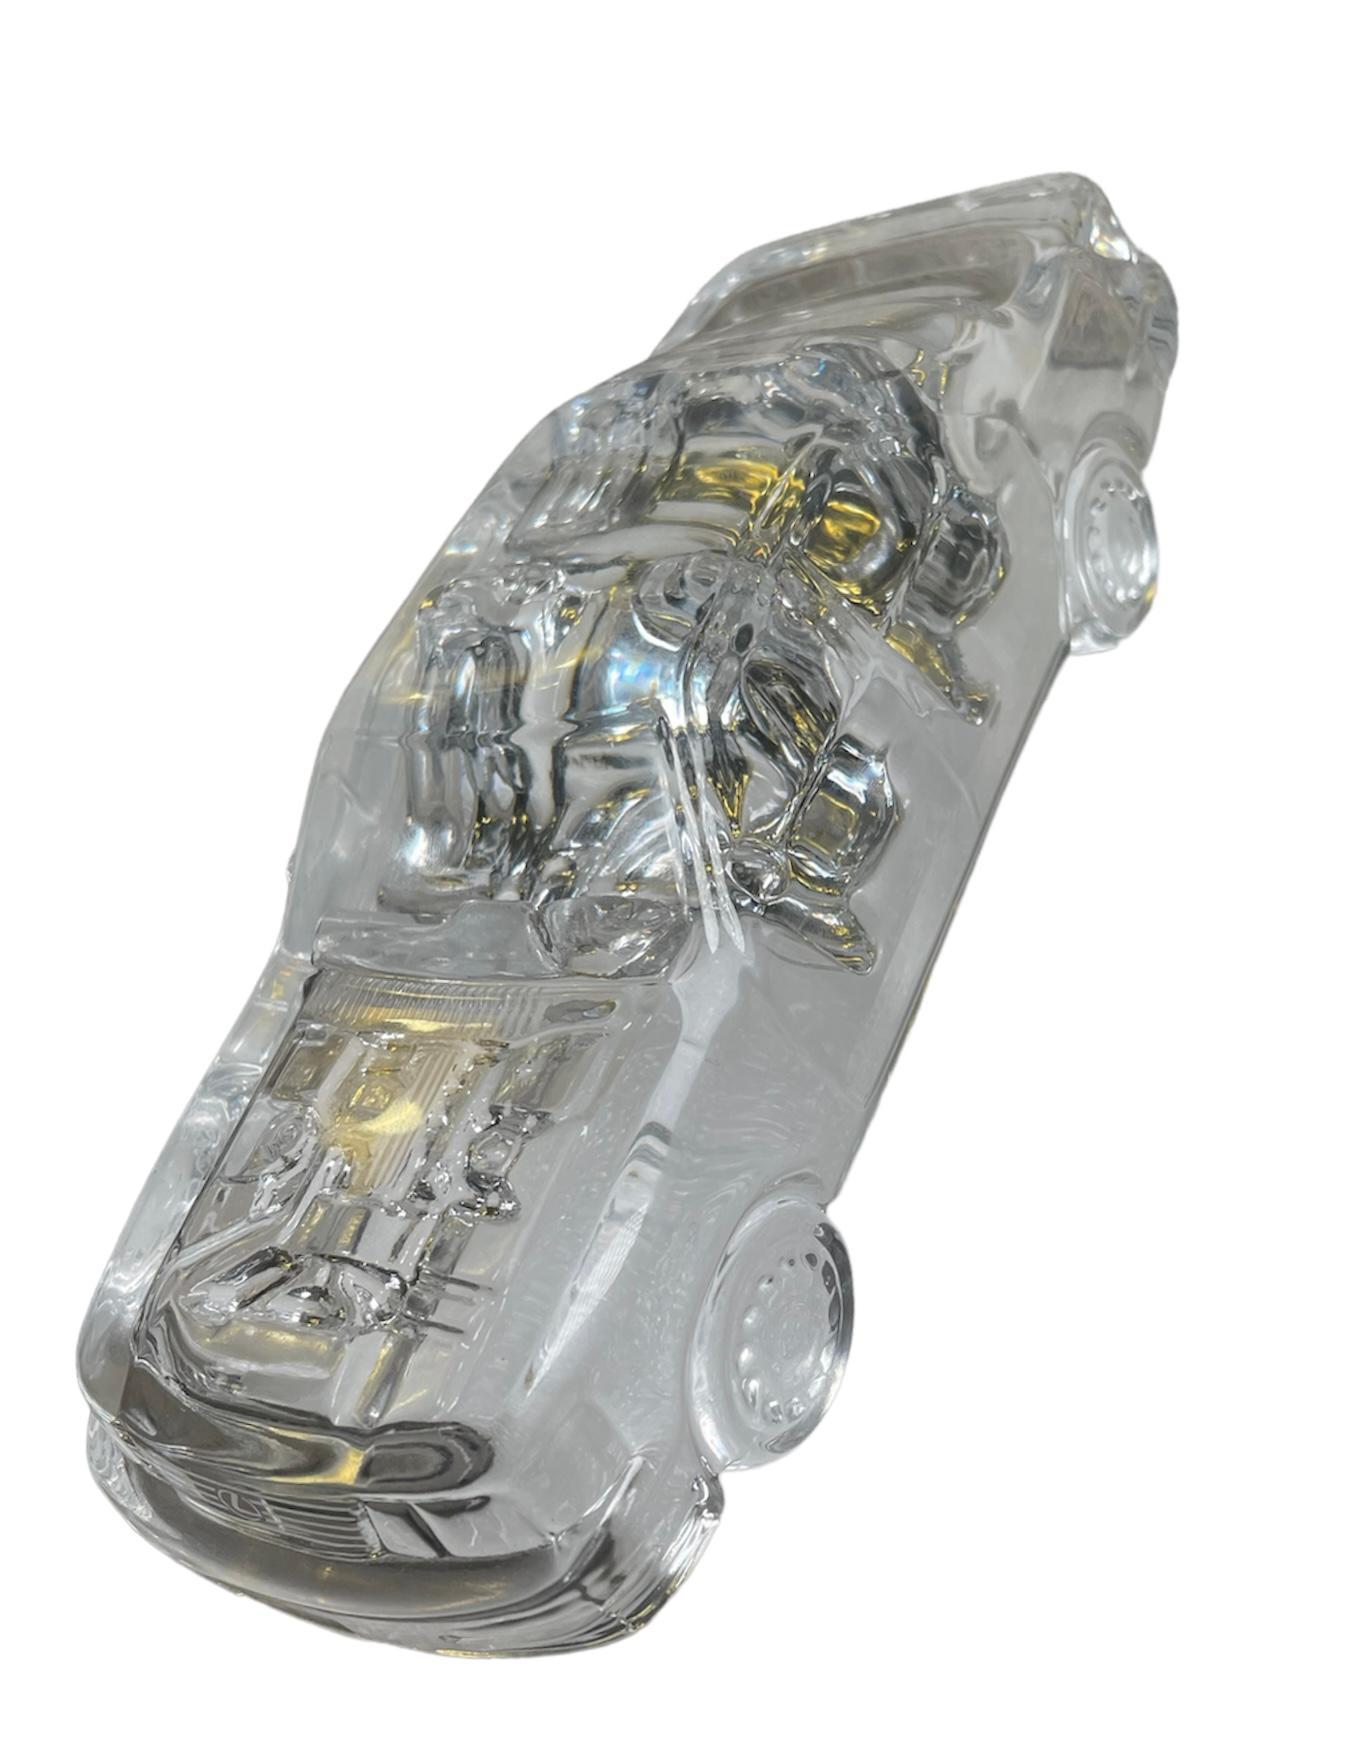 1989-90’s Clear Crystal Lexus LS 400 Car Paperweight For Sale 3